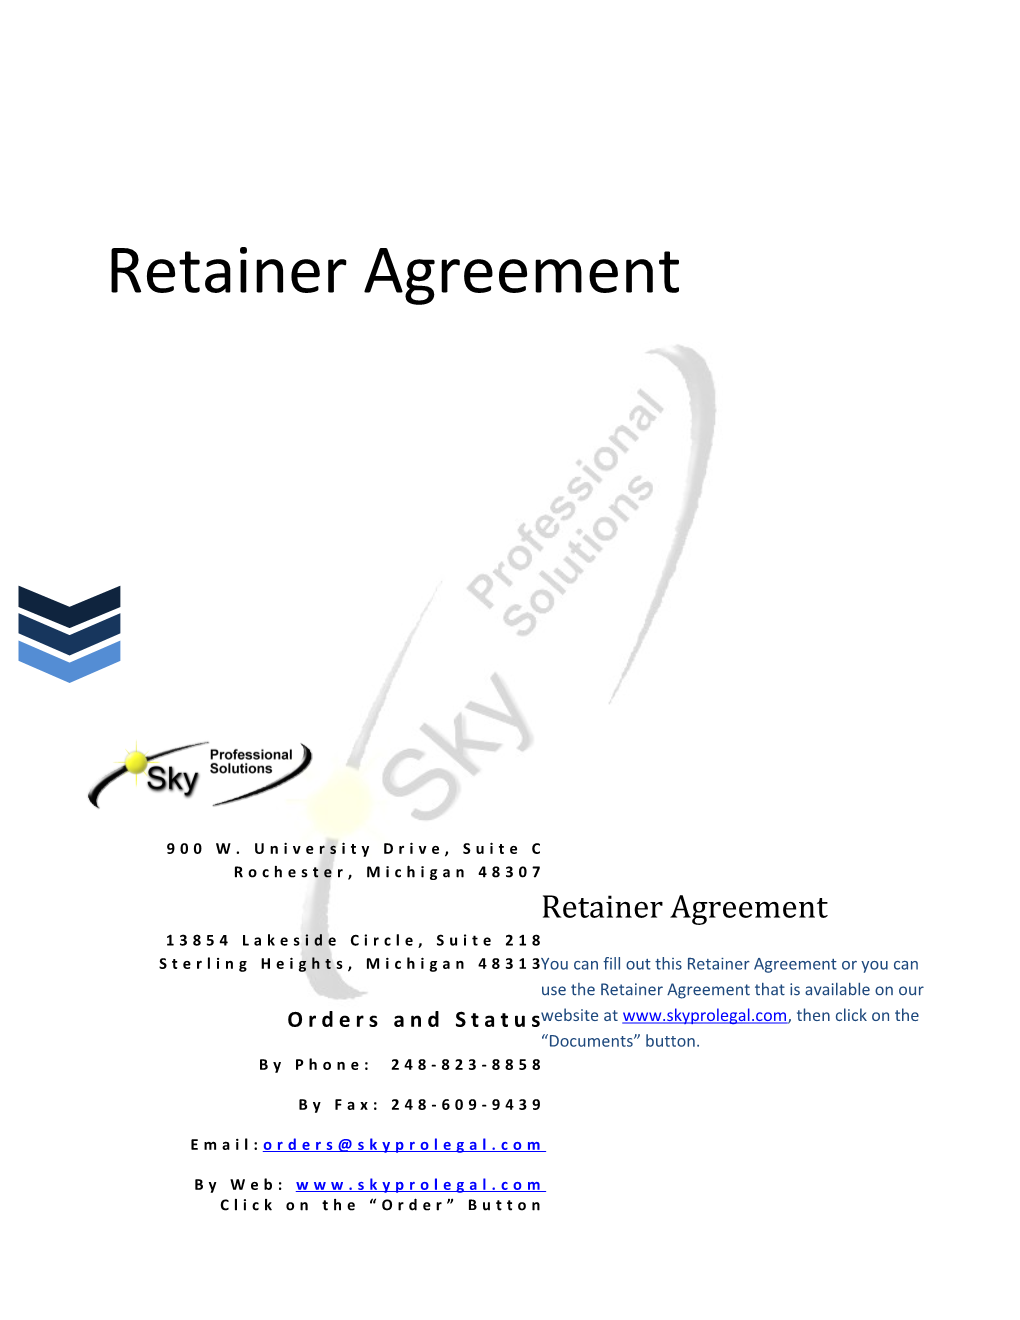 Terms of Engagement ( Retainer Agreement )